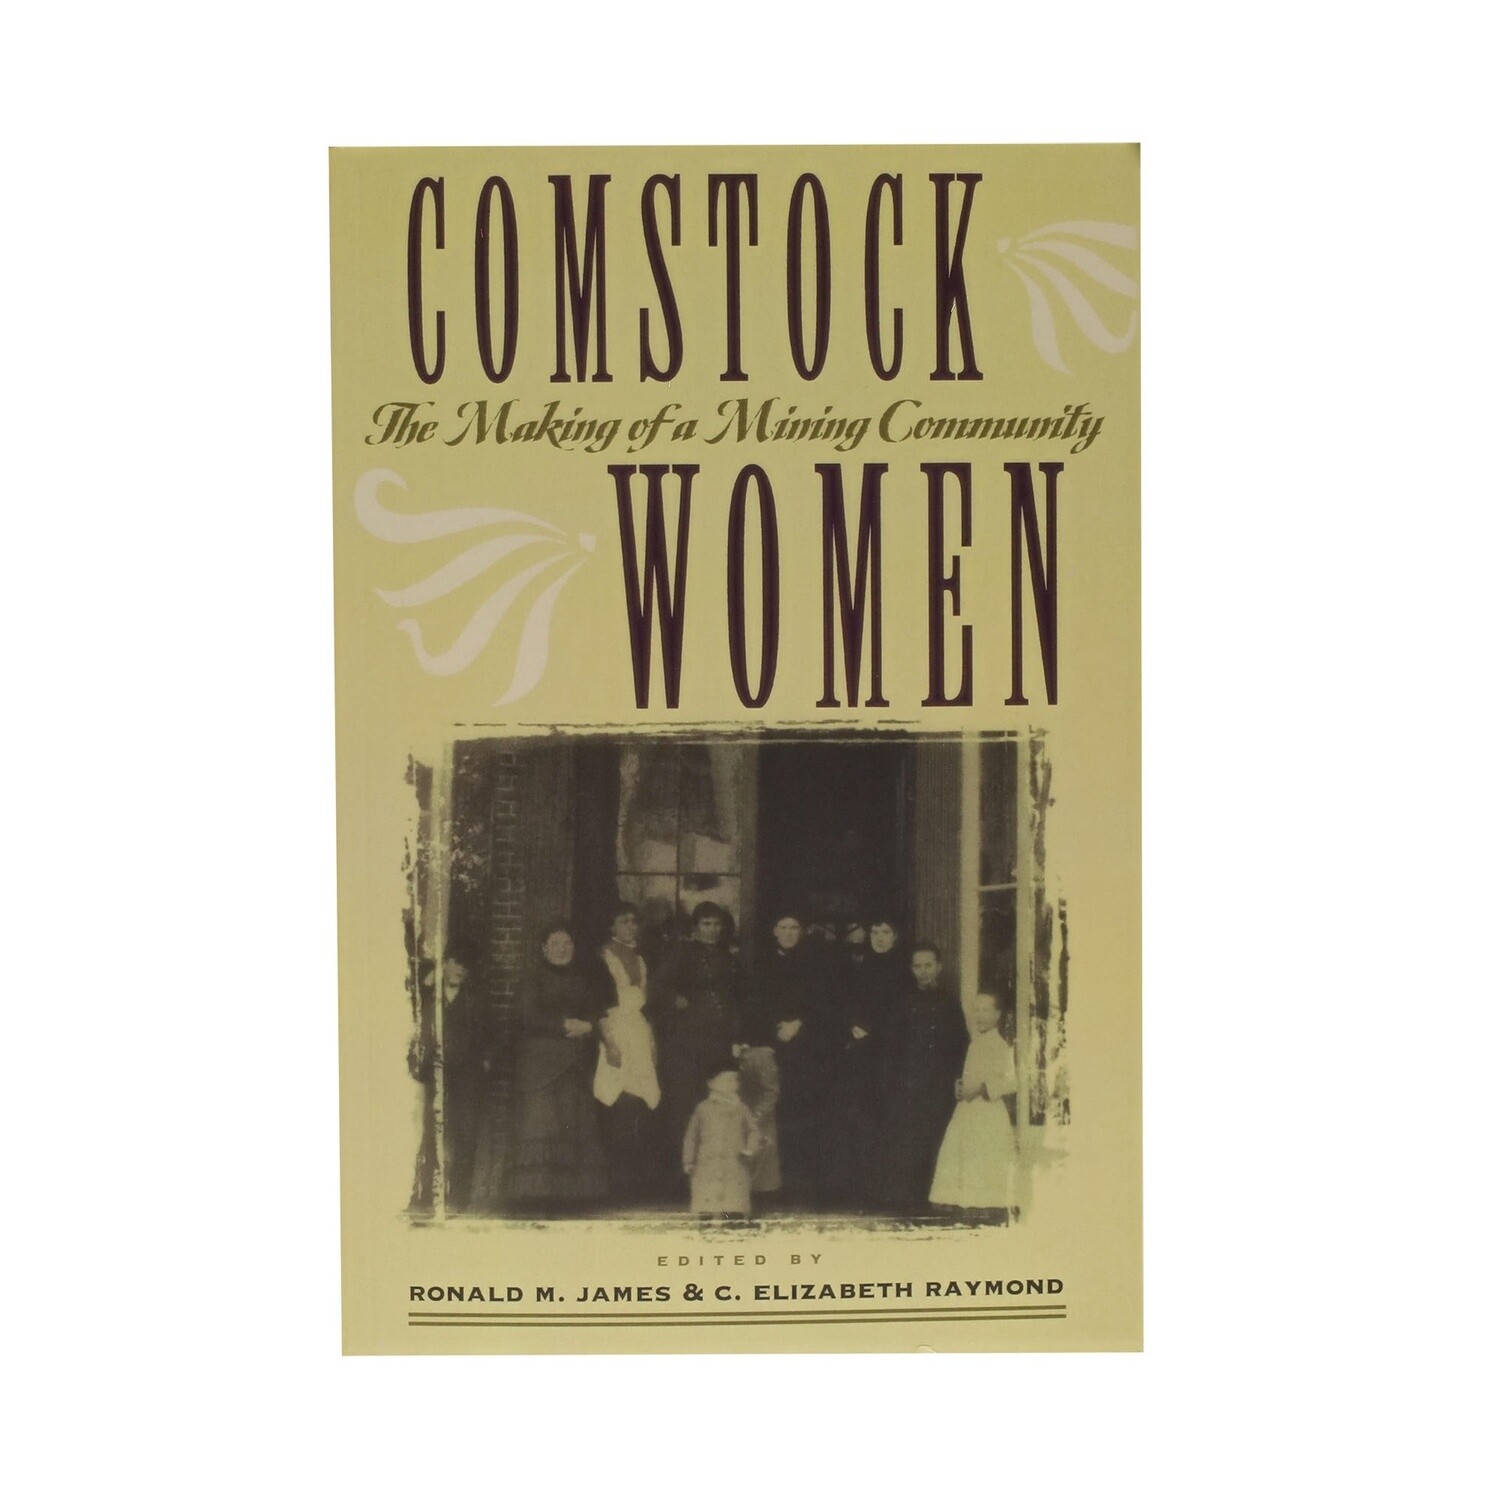 Comstock Women - The Making of a Mining Community Edited by Ronald M. James & C. Elizabeth Raymond